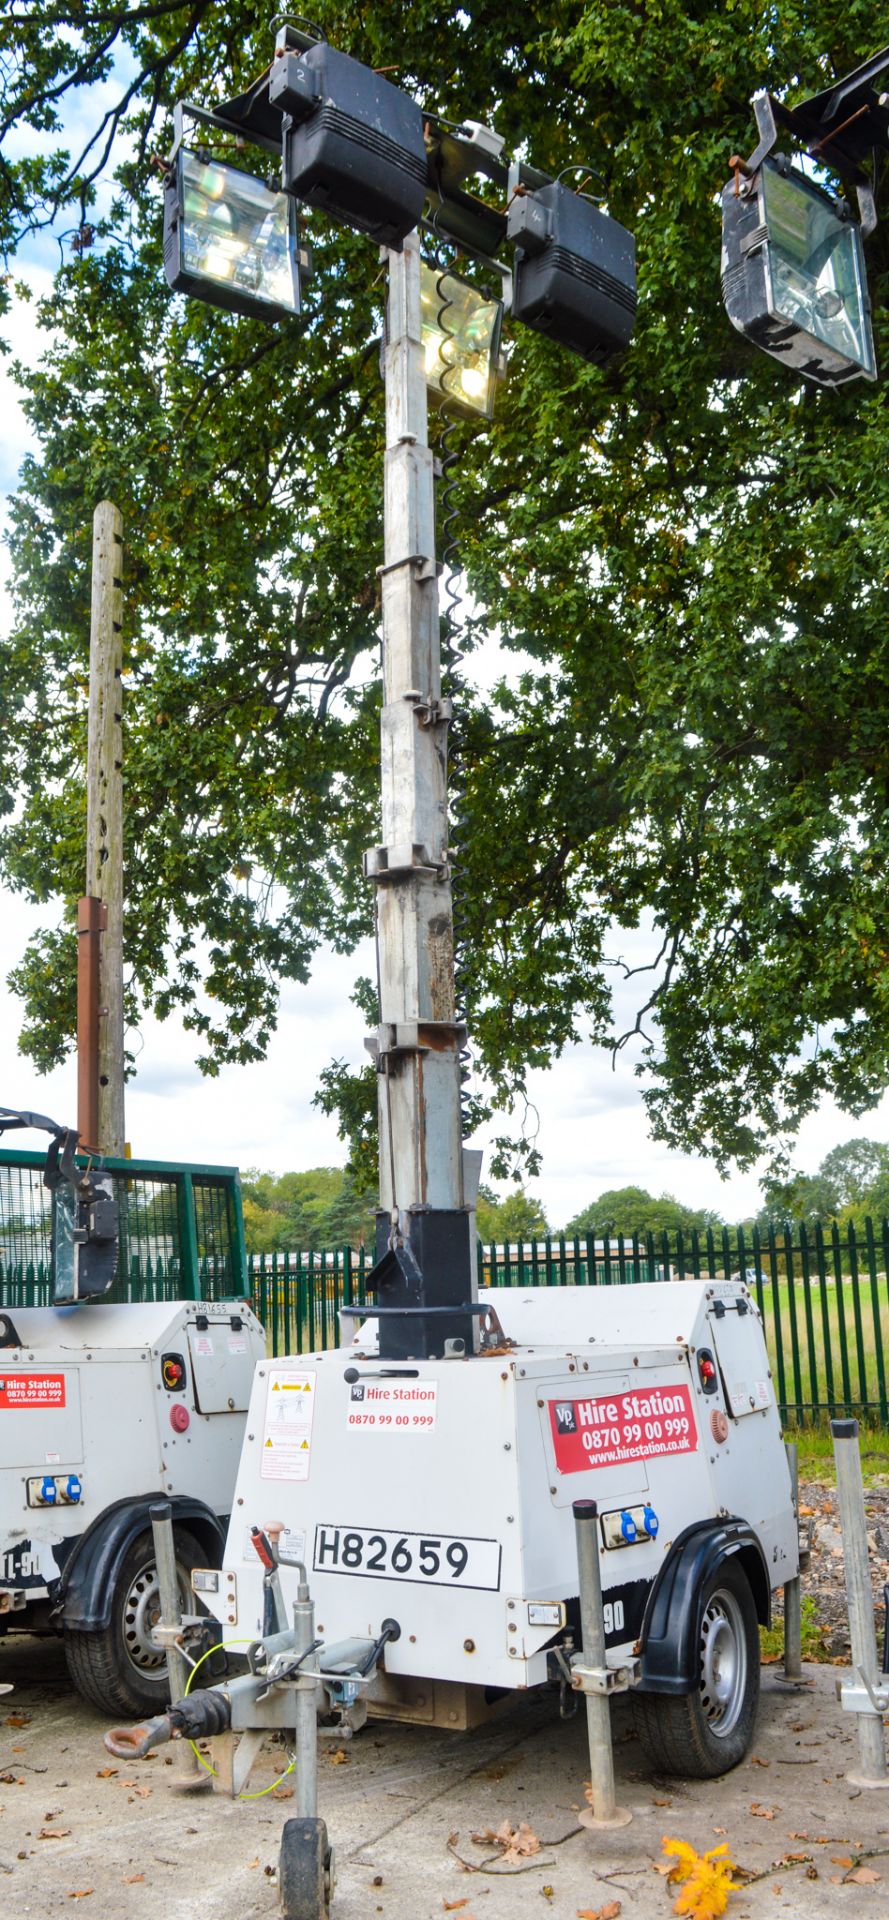 SMC TL90 diesel driven lighting tower Year: 2008 S/N: 1510 Recorded Hours: 4472 H82659 - Image 3 of 3